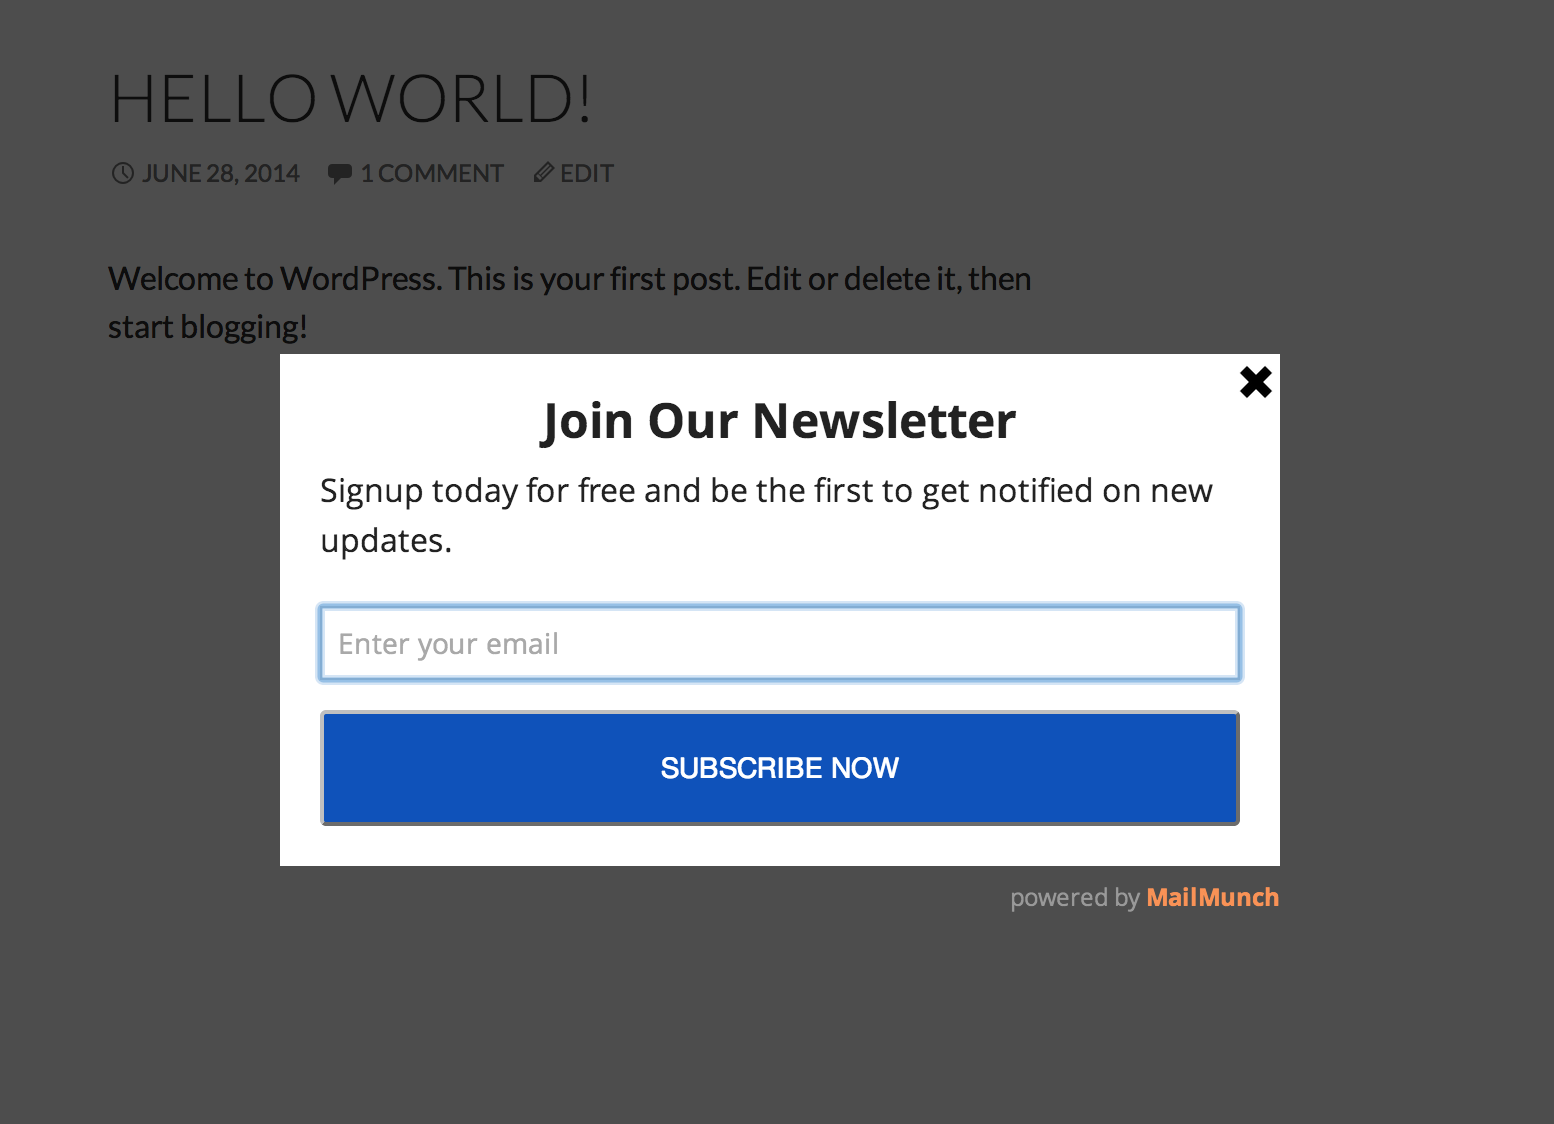 And finally, we have the optin form working live on your blog - increasing your AWeber subscribers :)